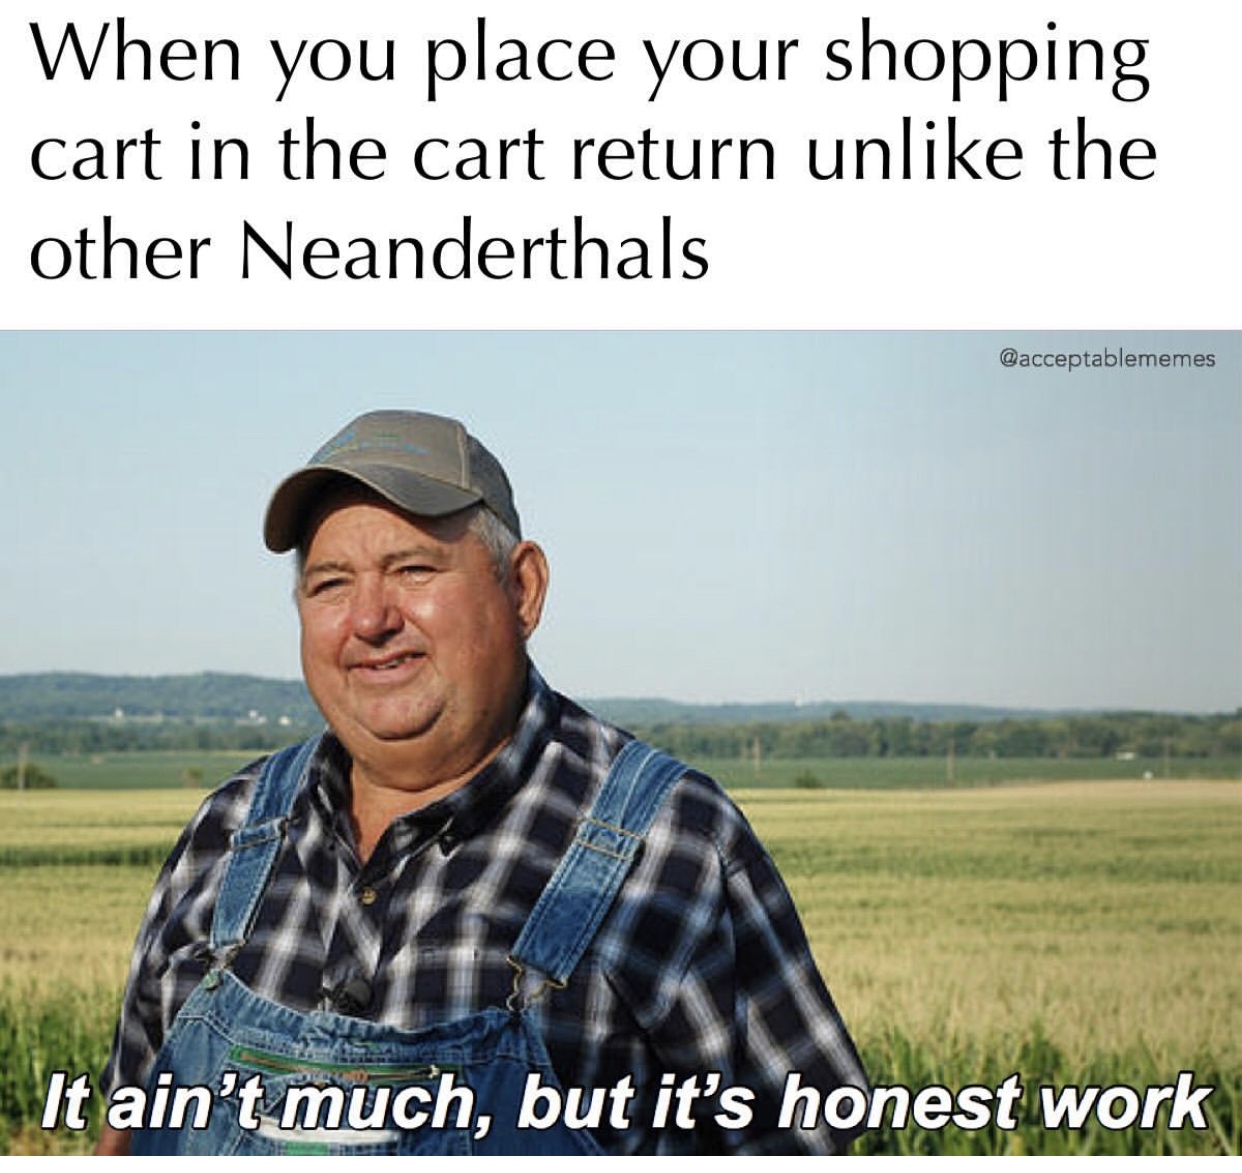 trending meme templates - When you place your shopping cart in the cart return un the other Neanderthals It ain't much, but it's honest work